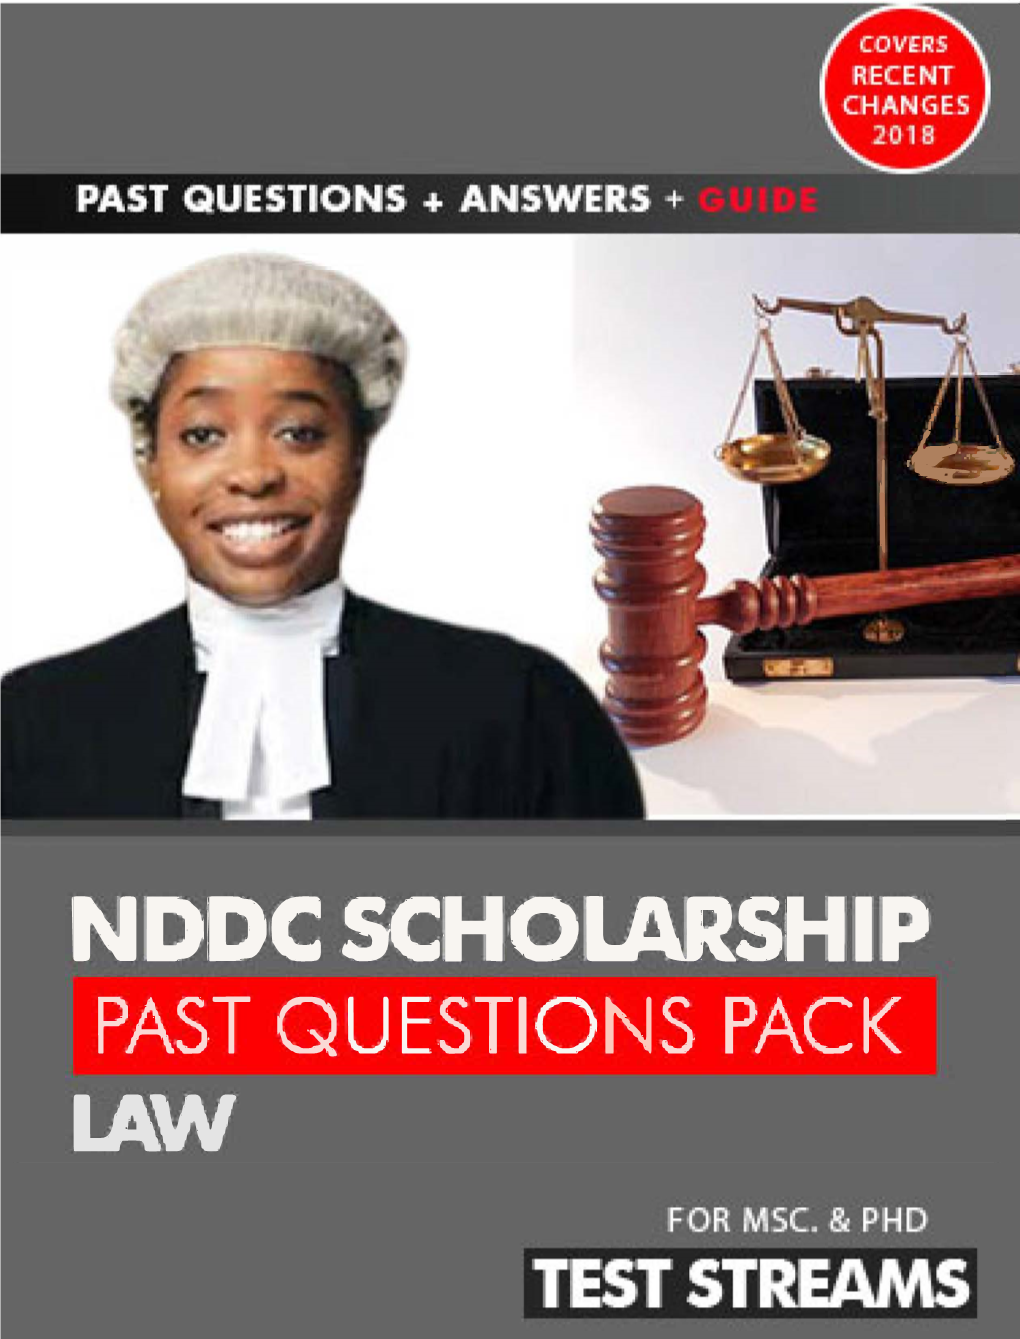 NDDC SCHOLARSHIP PAST QUESTIONS PACK Law Before You Begin